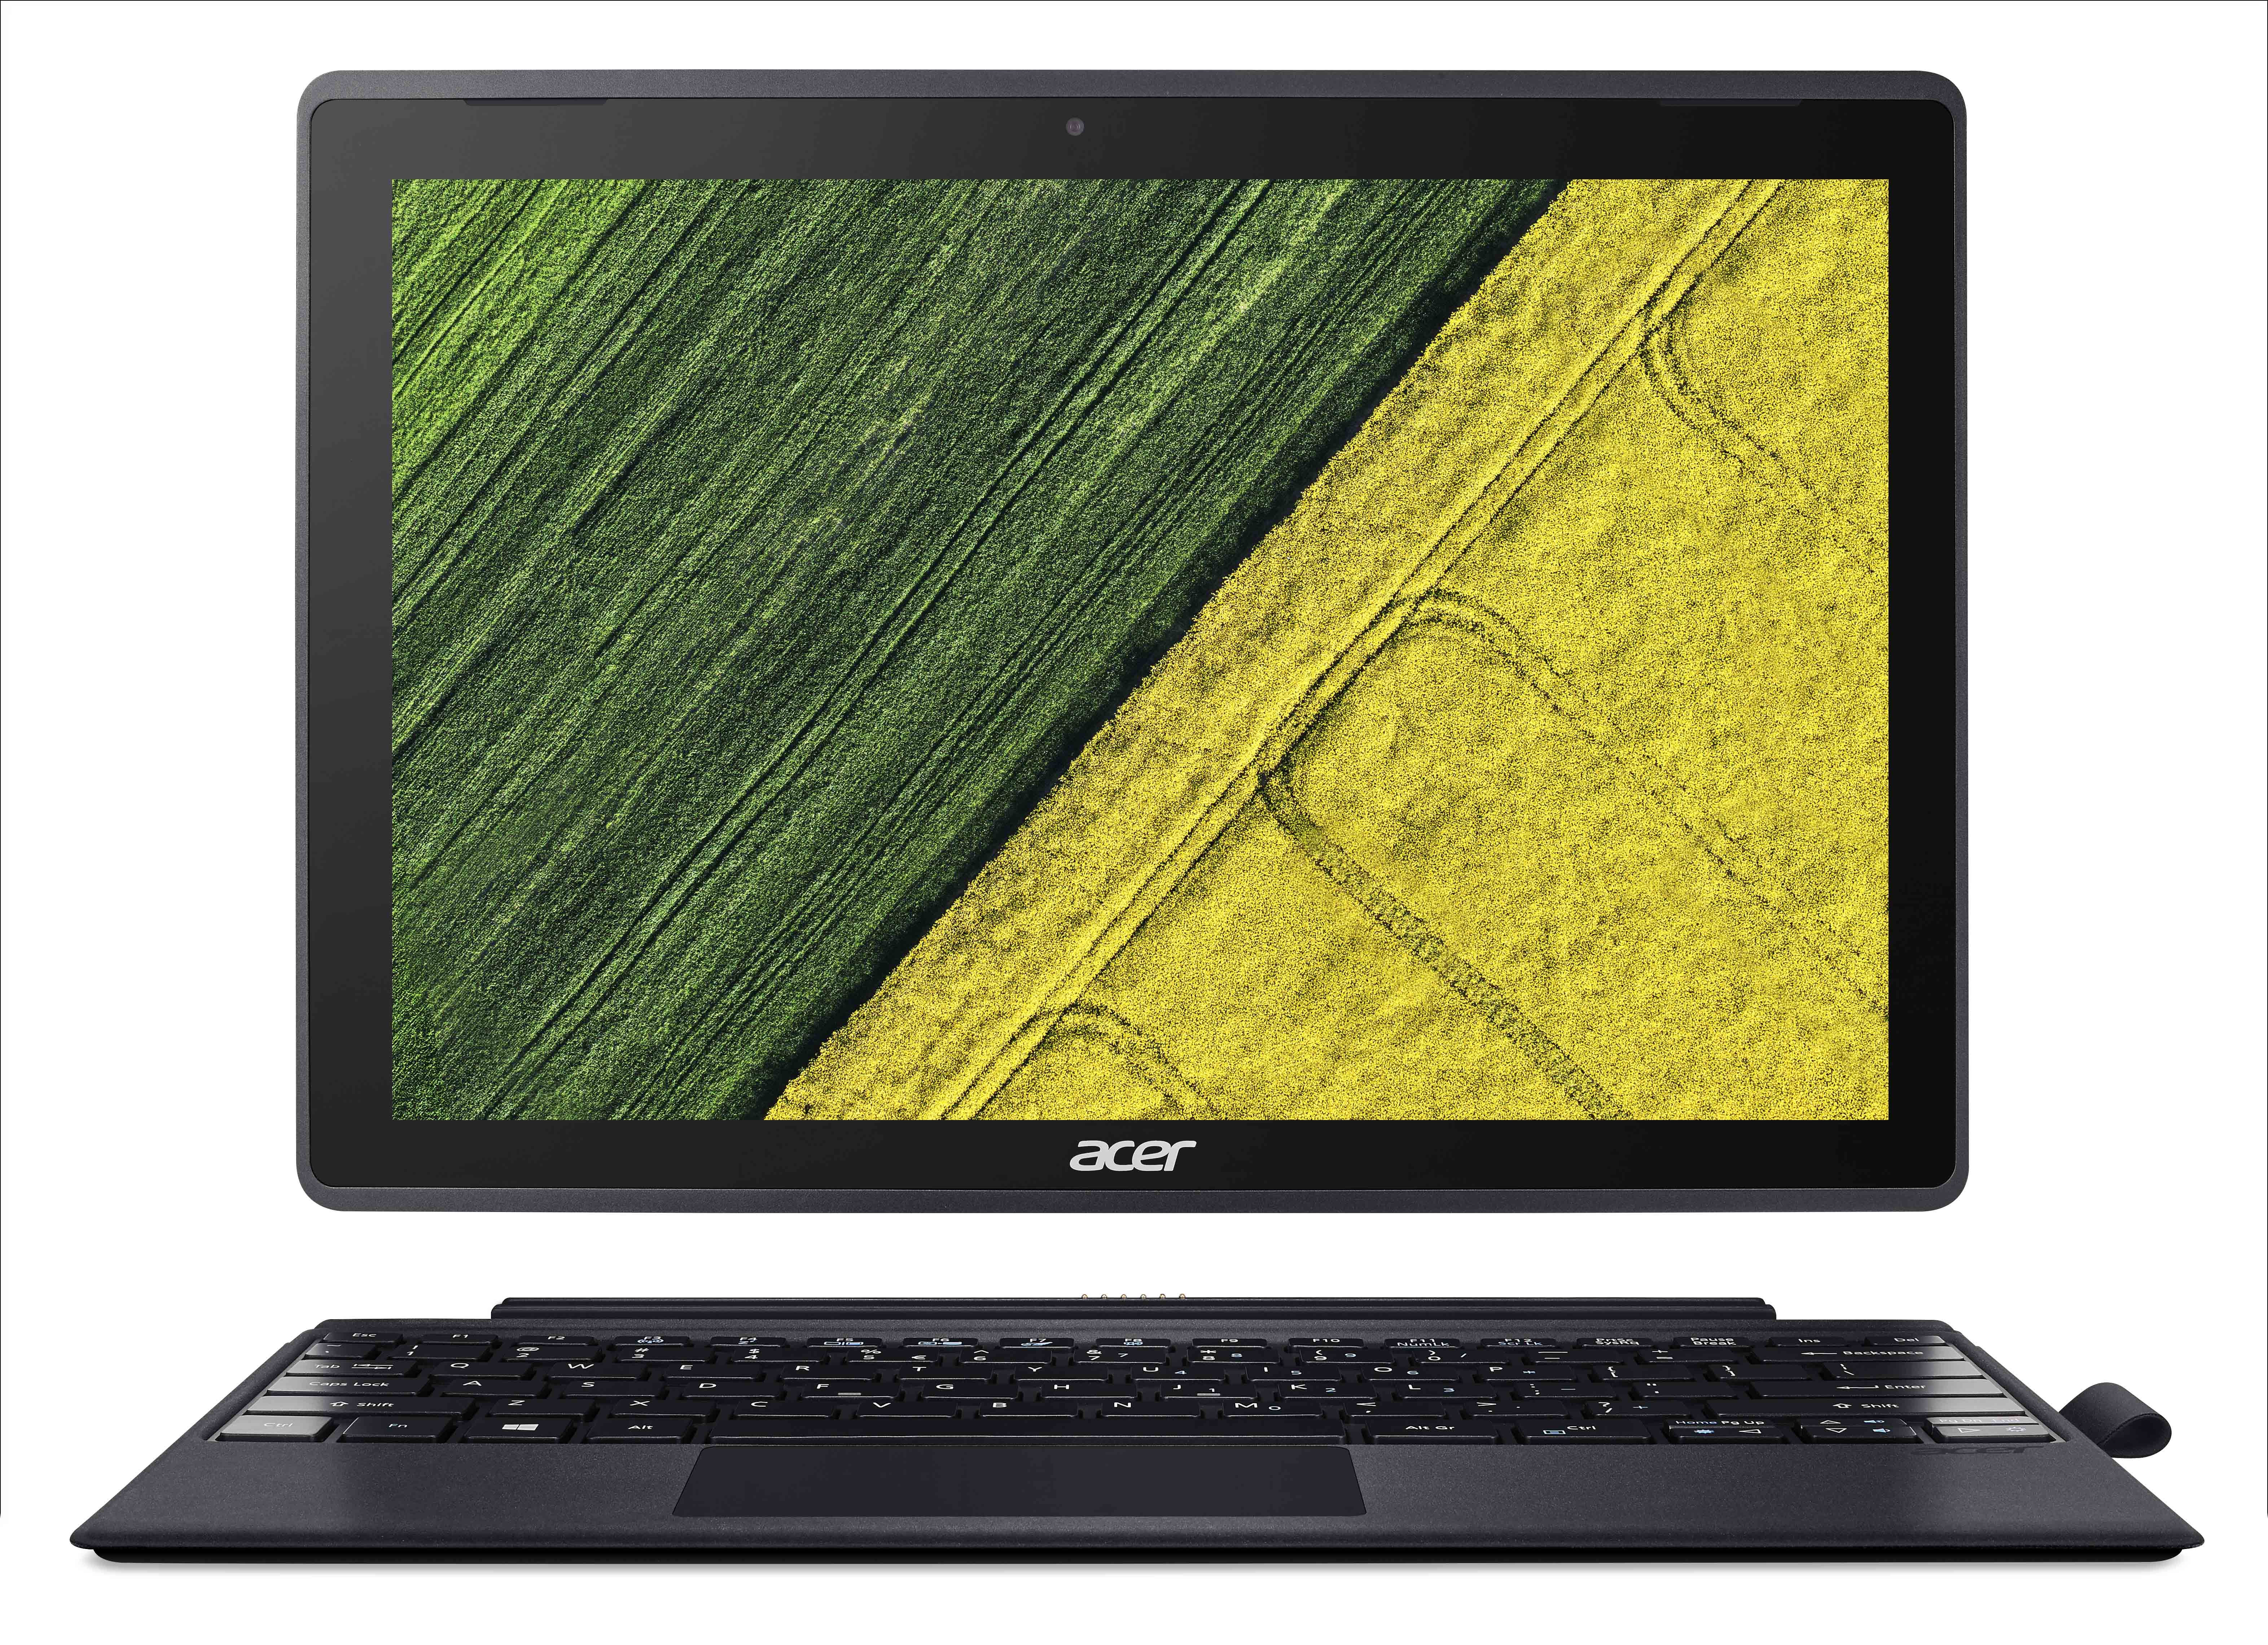 The Acer Switch 3 with Windows 10